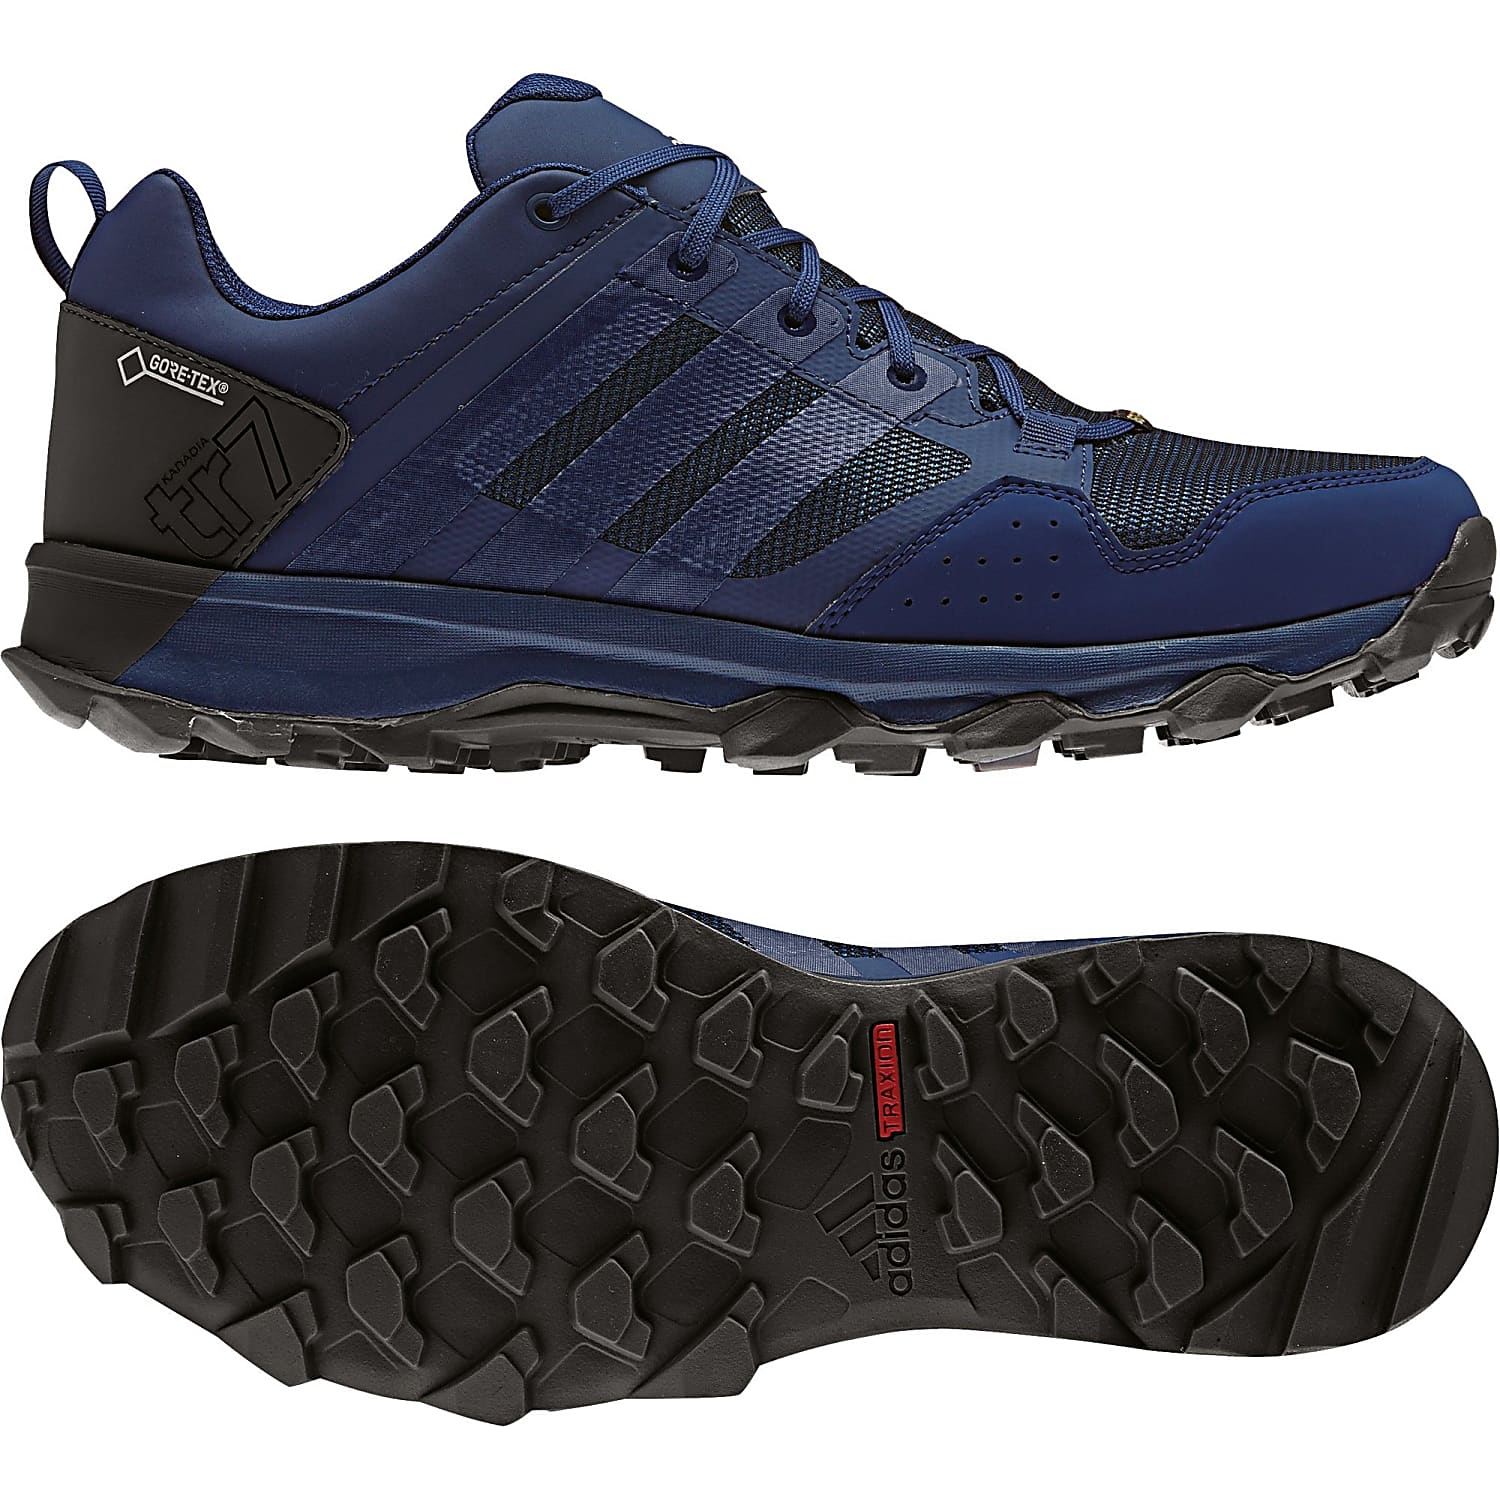 adidas traxion black and blue